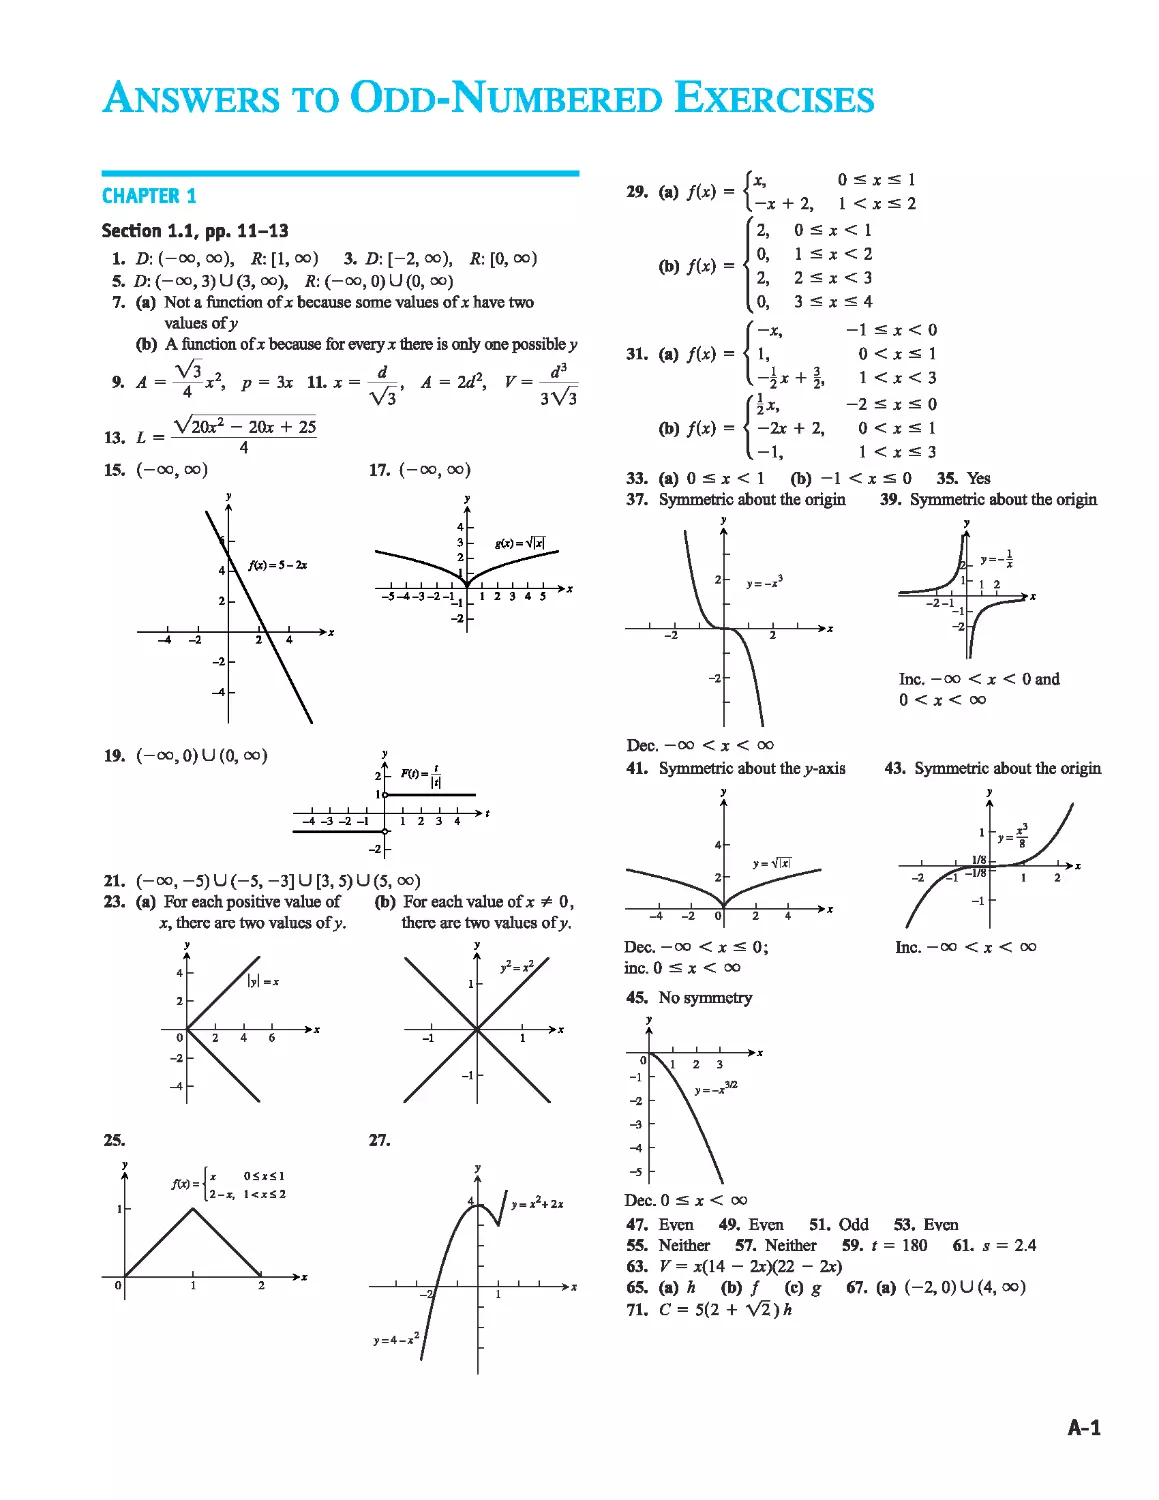 Answers to Odd-Numbered Exercises